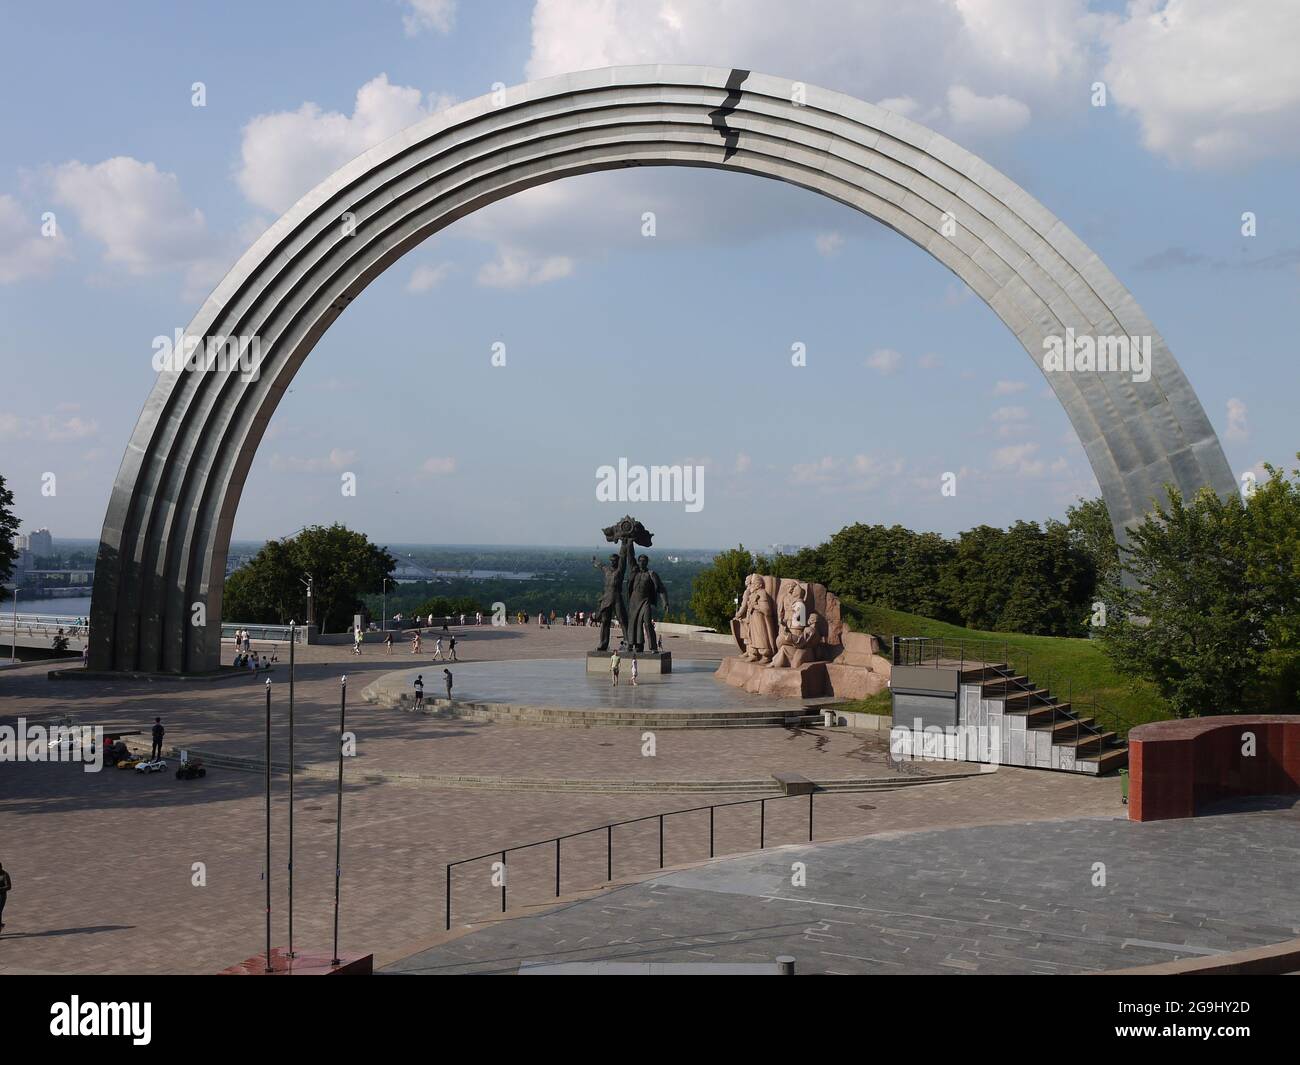 A break was painted on the Peoples' Friendship Arch, a monument in Kyiv, the capital of Ukraine, after Russia annexed Crimea Stock Photo